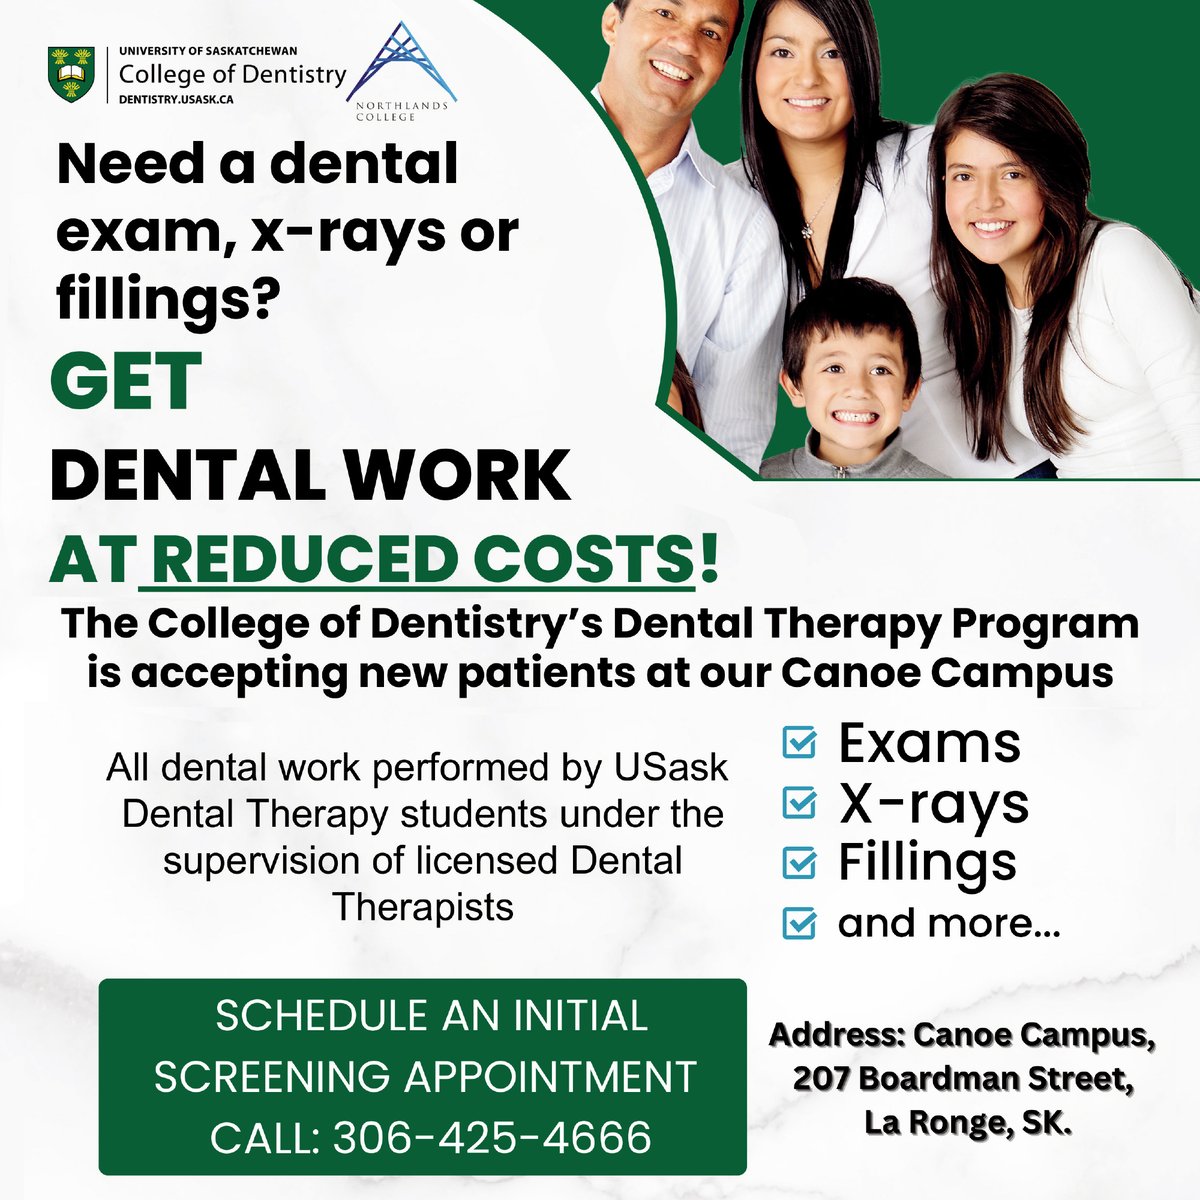 Come in for a personalized dental therapy session. All dental work is performed by dental therapy program students under the supervision of licensed dental therapists.

Schedule your appointment today.

#northlandscollege #dentaltherapy #xrays #fillings #dentalexam